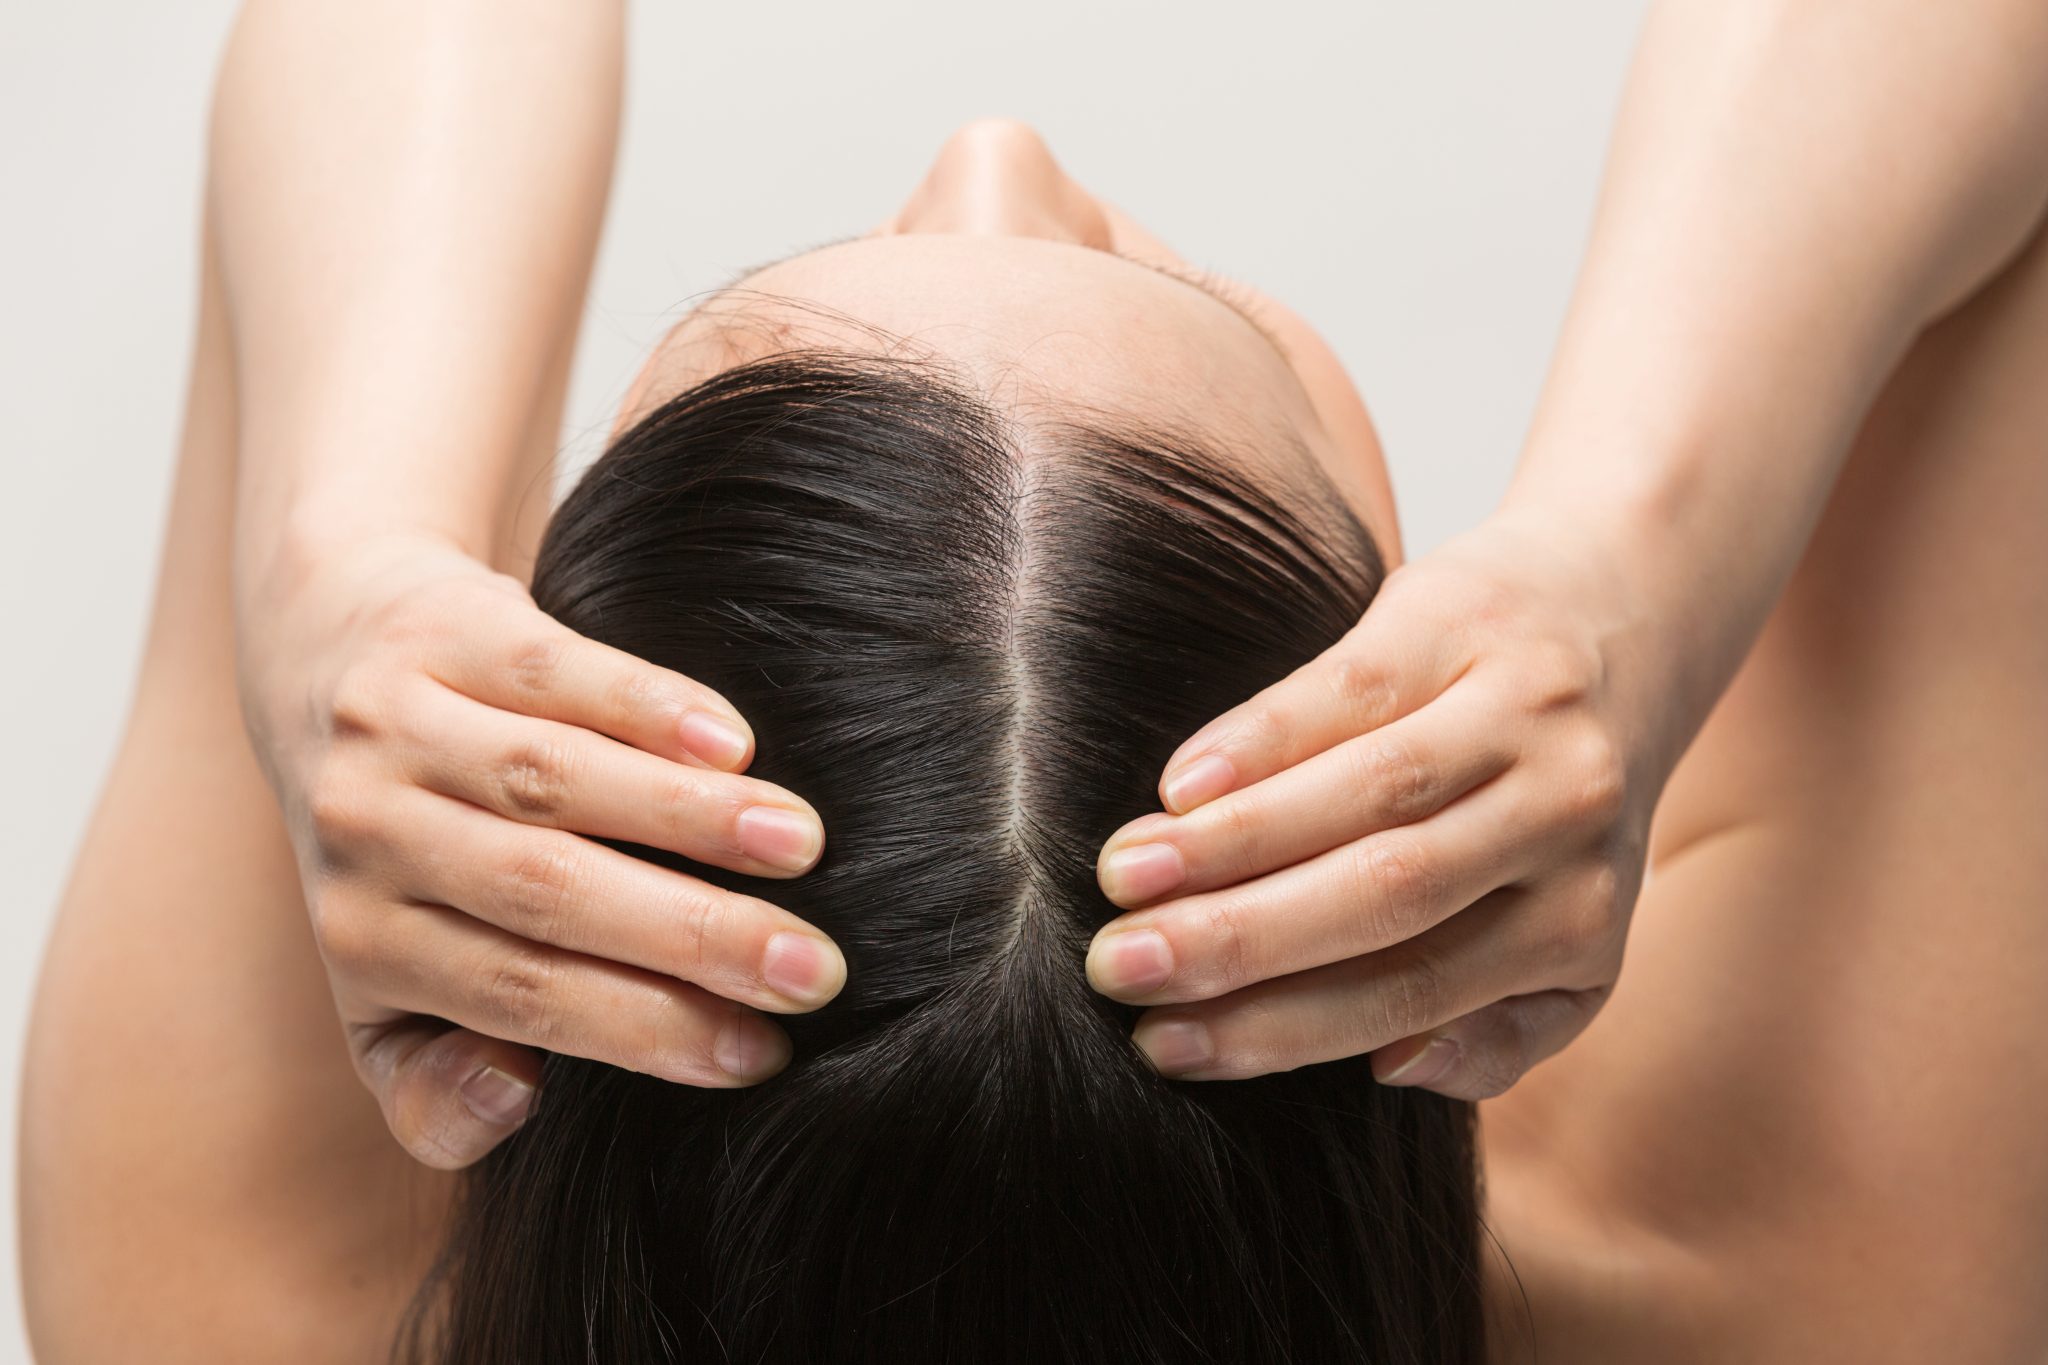 Tips to keep your hair follicle healthy so you can prevent hair loss